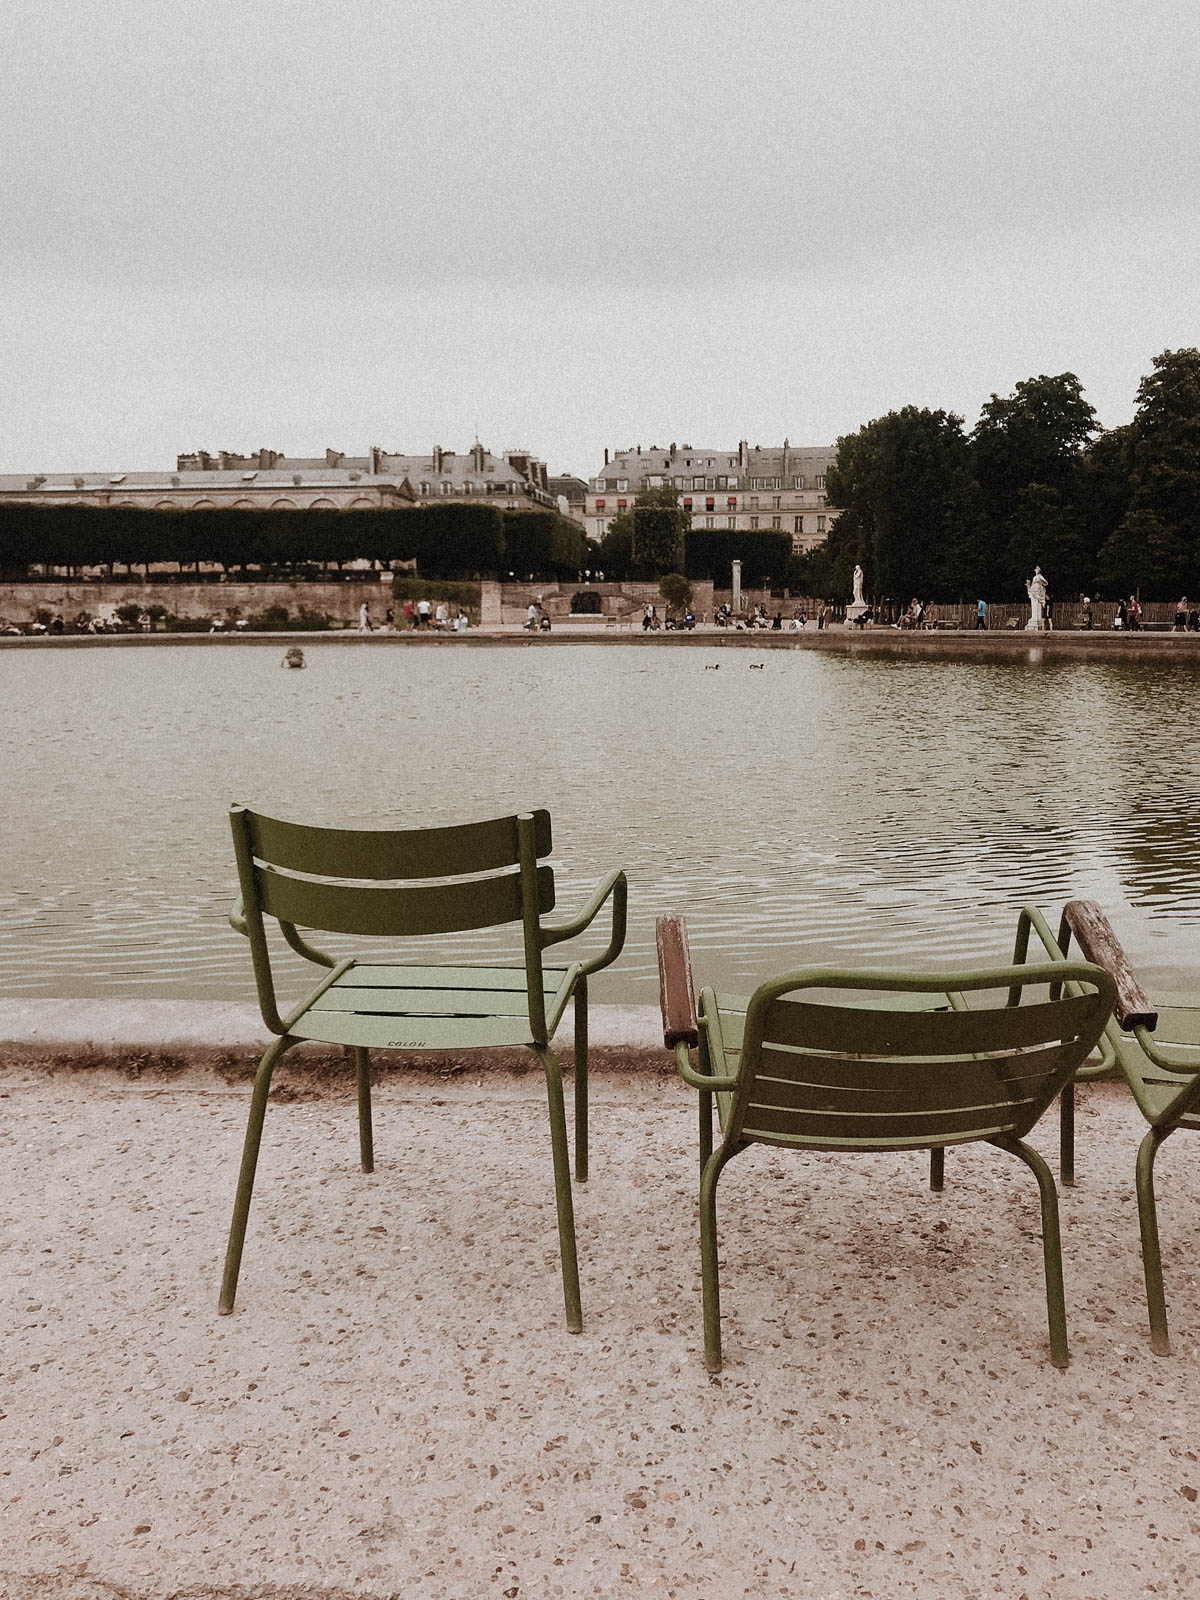 Paris France Travel Guide - Jardin du Luxembourg, European Architecture and Parks / RG Daily Blog